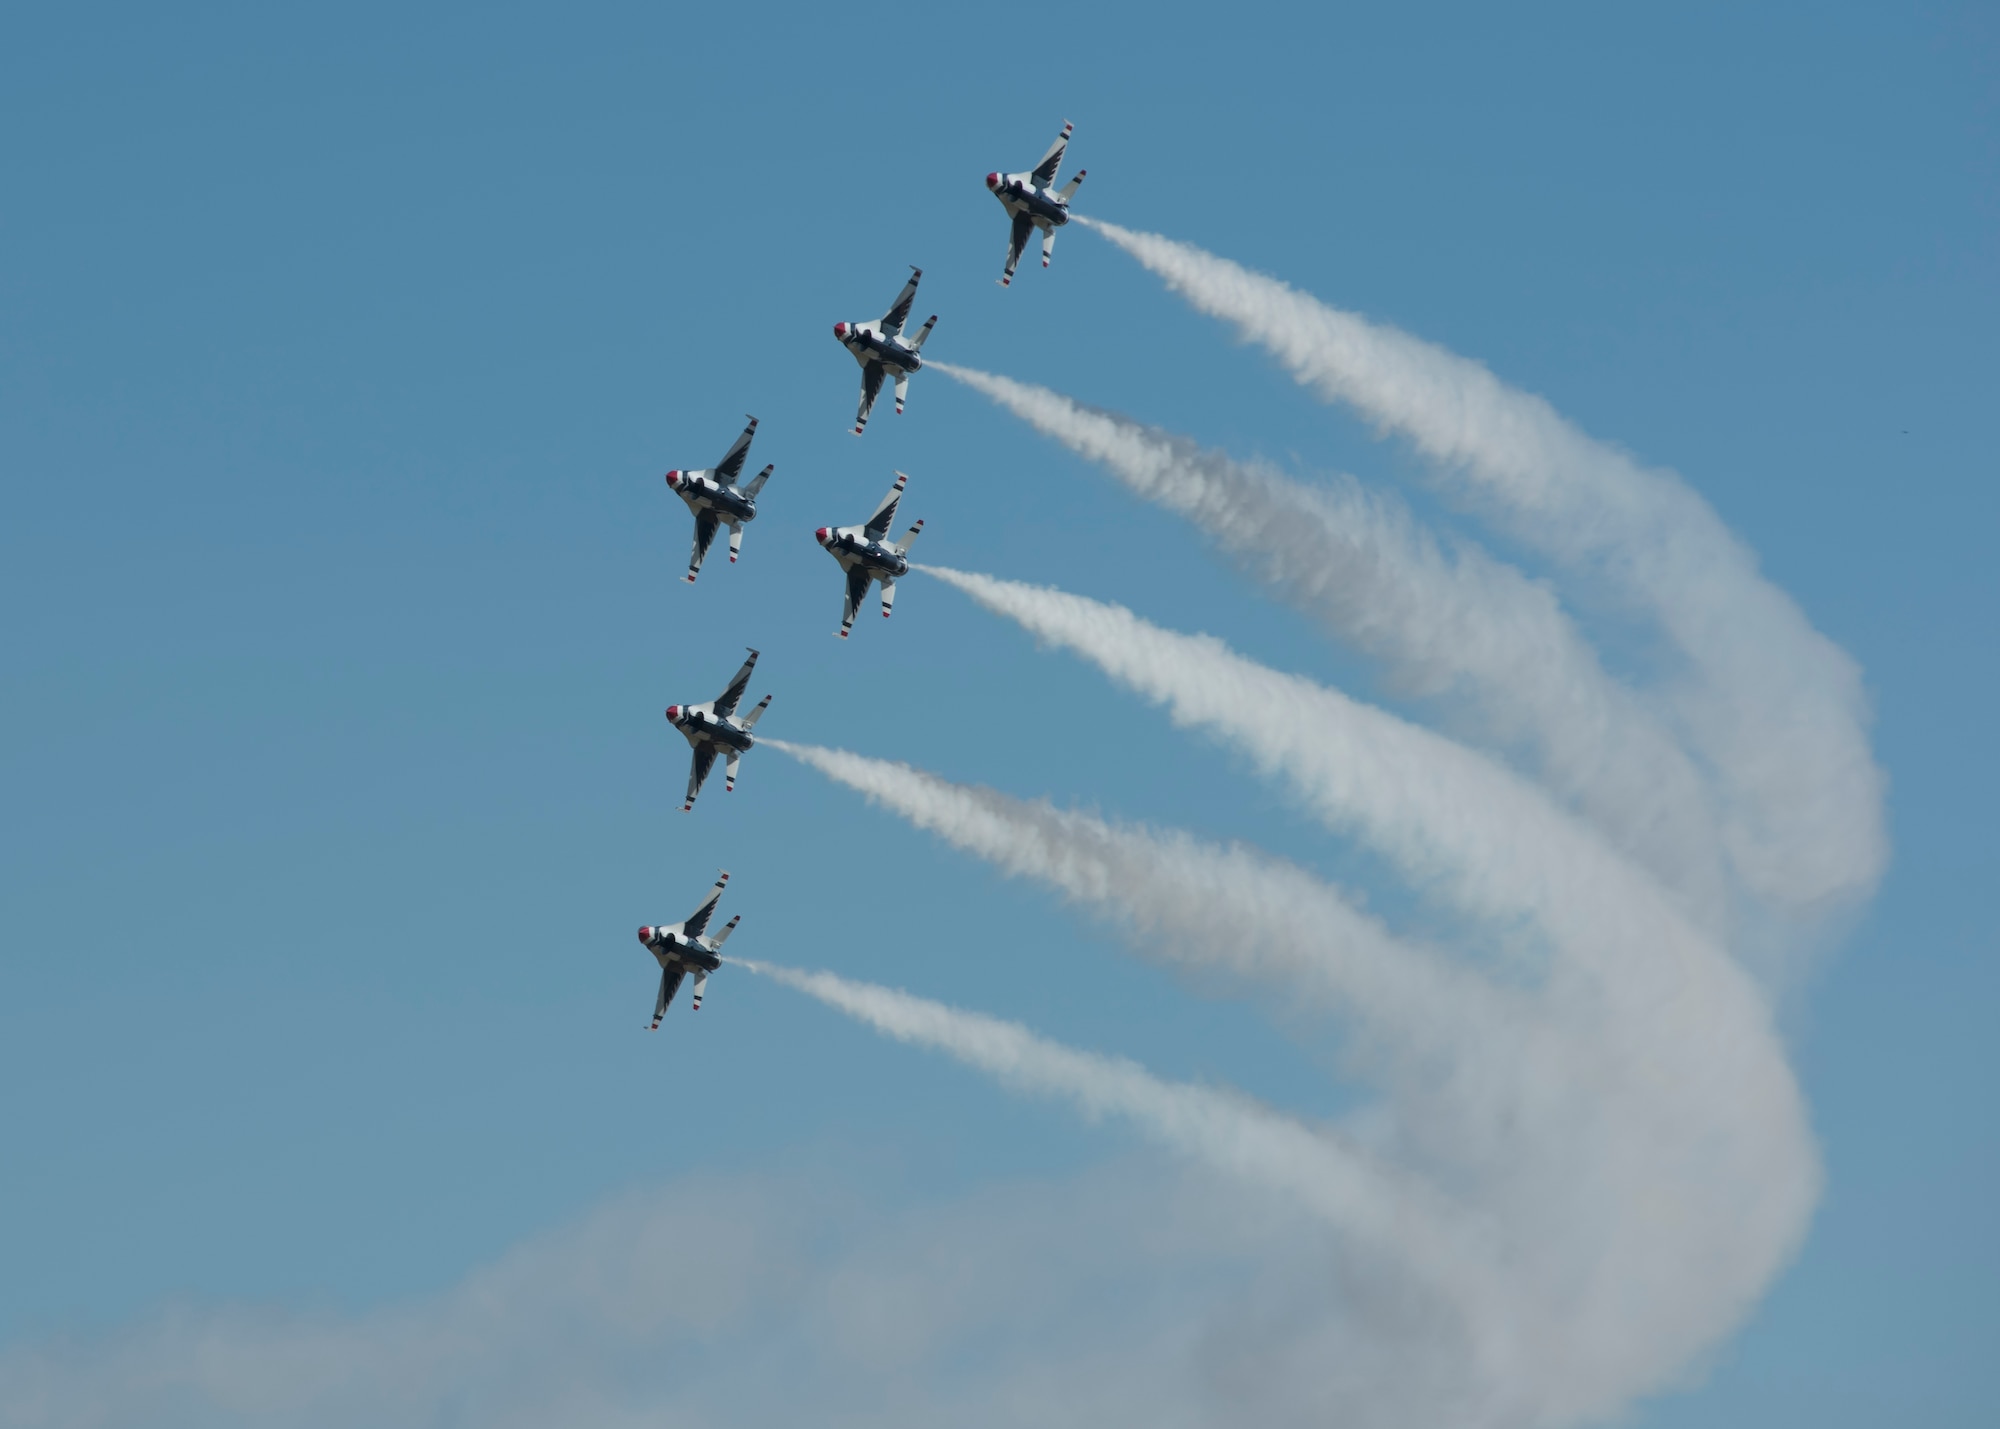 Six F-16 Fighting Falcons from the Thunderbirds aerial demonstration team fly in formation at the Skyfest 2017 air show and open house July 29, 2017, at Fairchild Air Force Base, Washington. The Thunderbirds are assigned to the 57th Wing, and are based at Nellis Air Force Base, Nevada. (U.S. Air Force photo / Airman 1st Class Ryan Lackey)